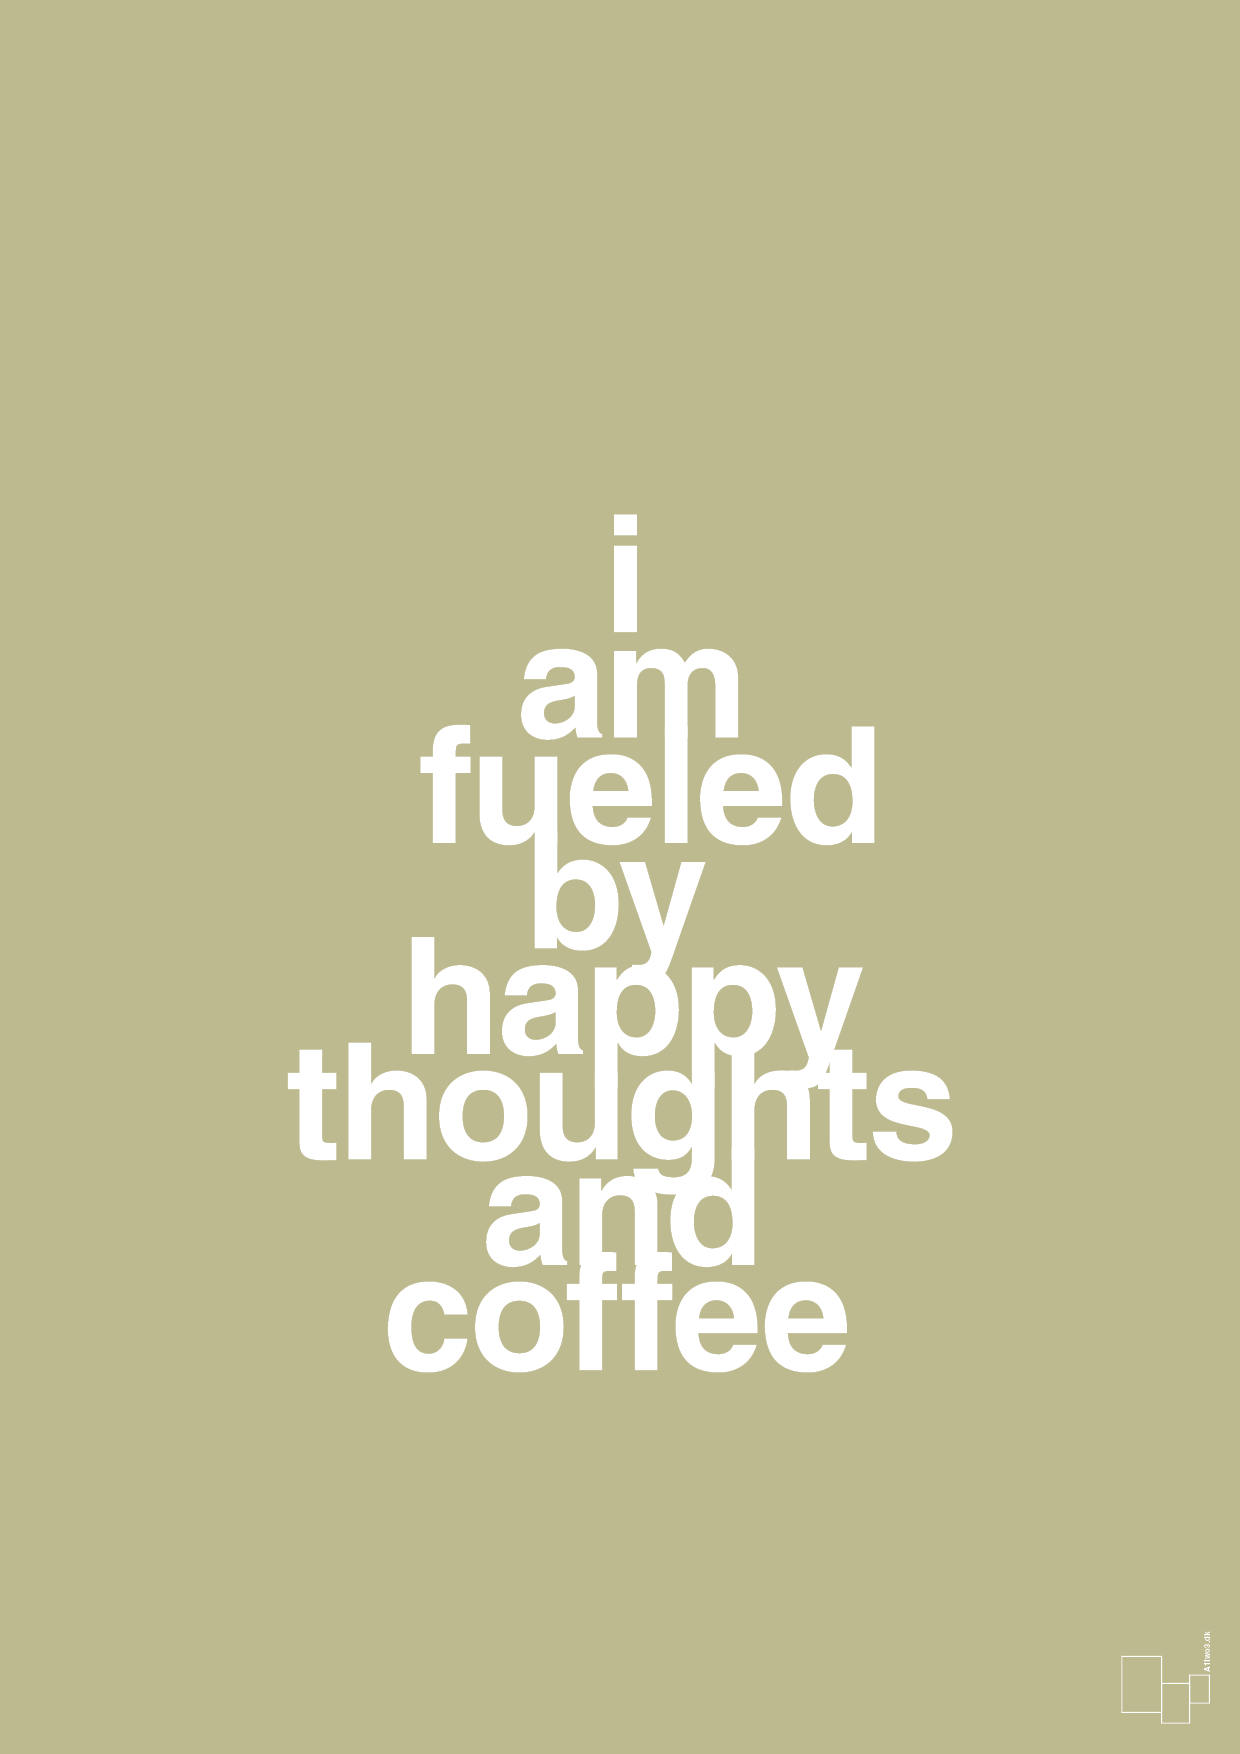 i am fueled by happy thoughts and coffee - Plakat med Mad & Drikke i Back to Nature